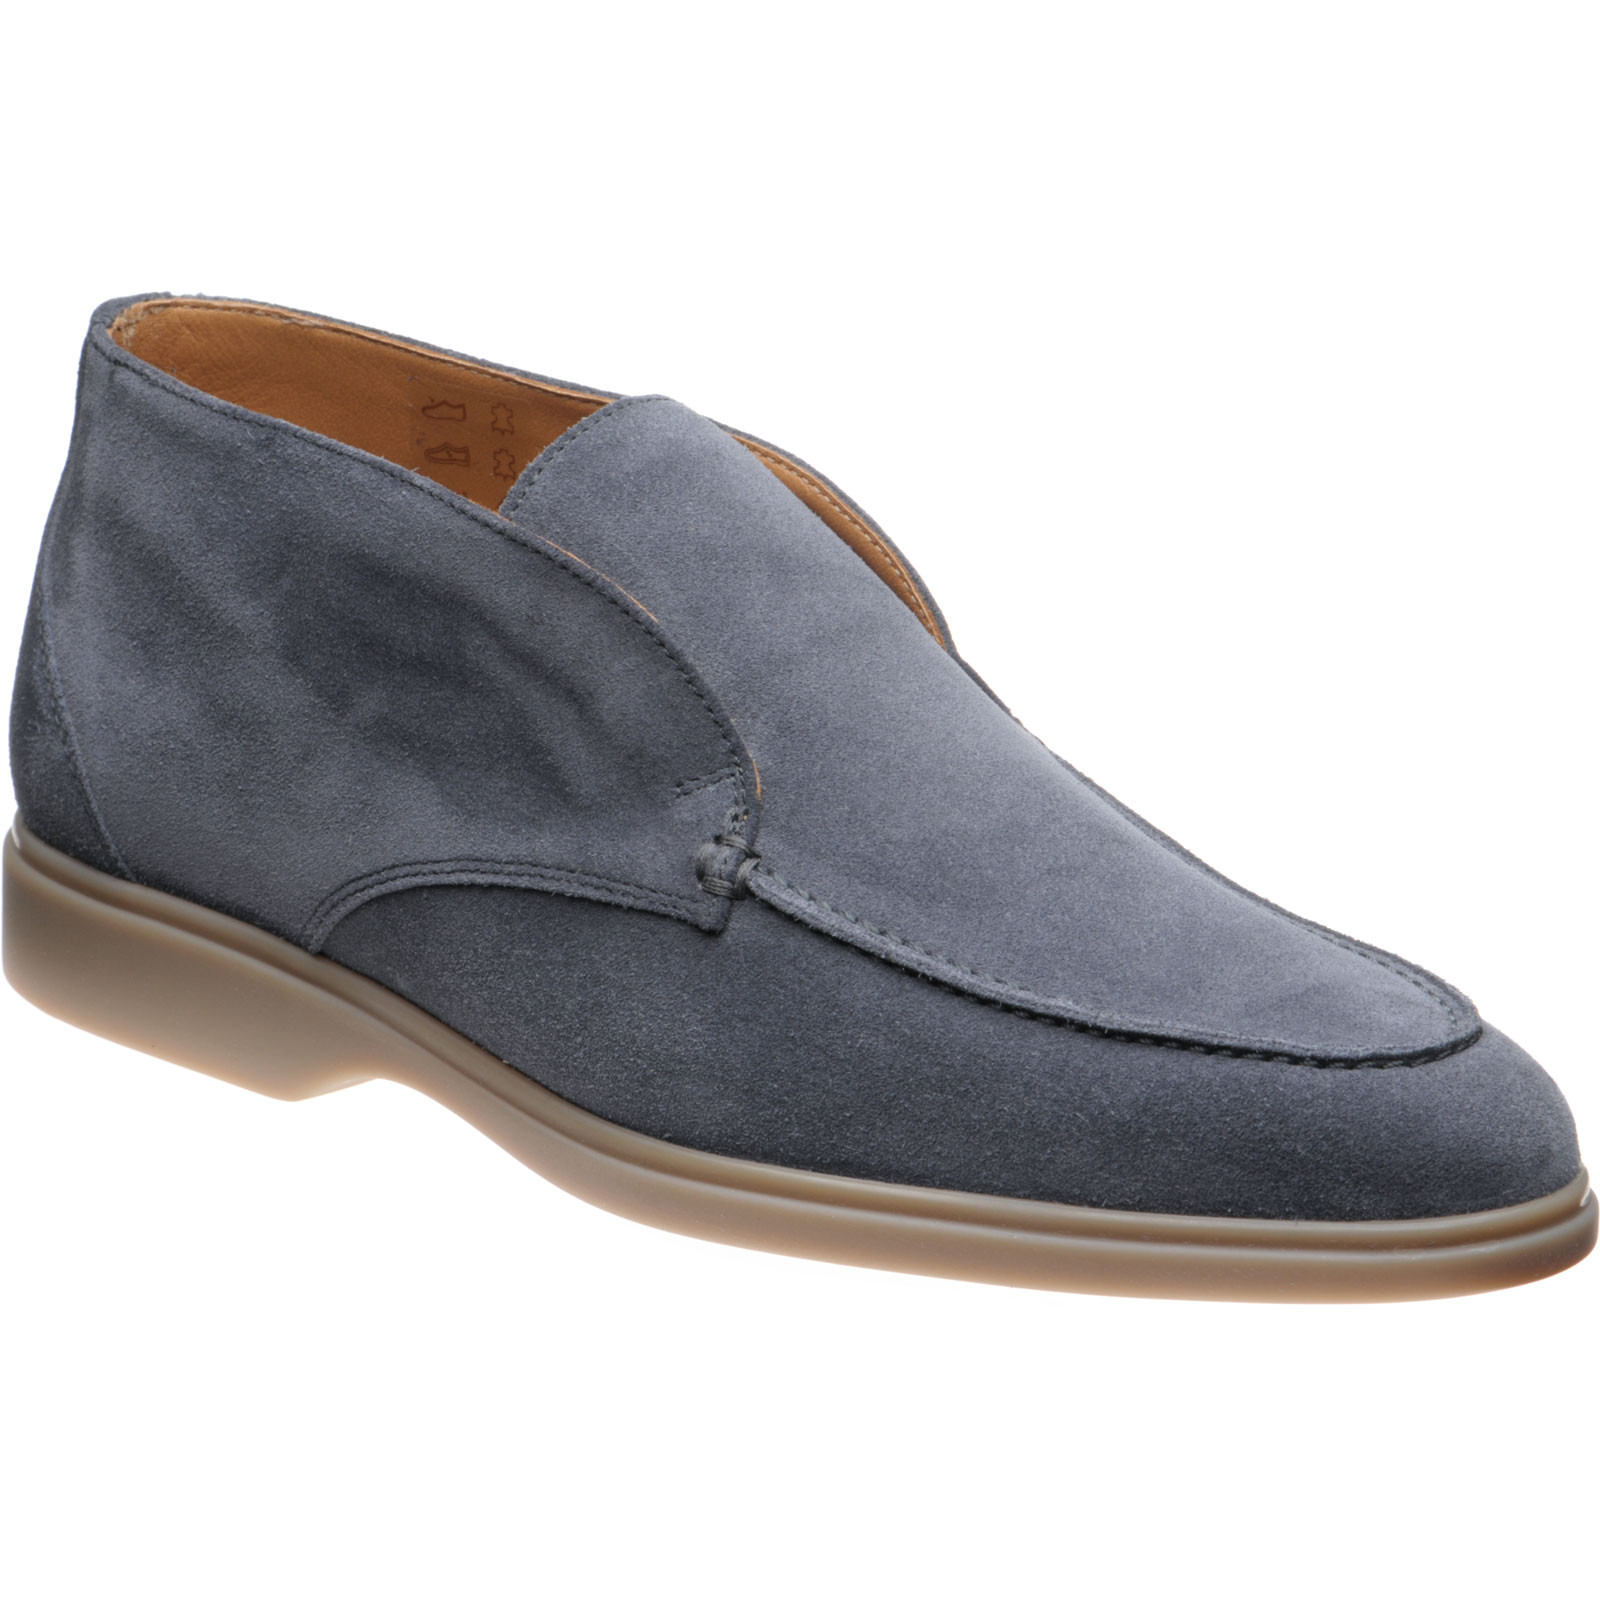 Stemar shoes | Stemar Sale | Piazza rubber-soled boots in Grigio Scuro ...